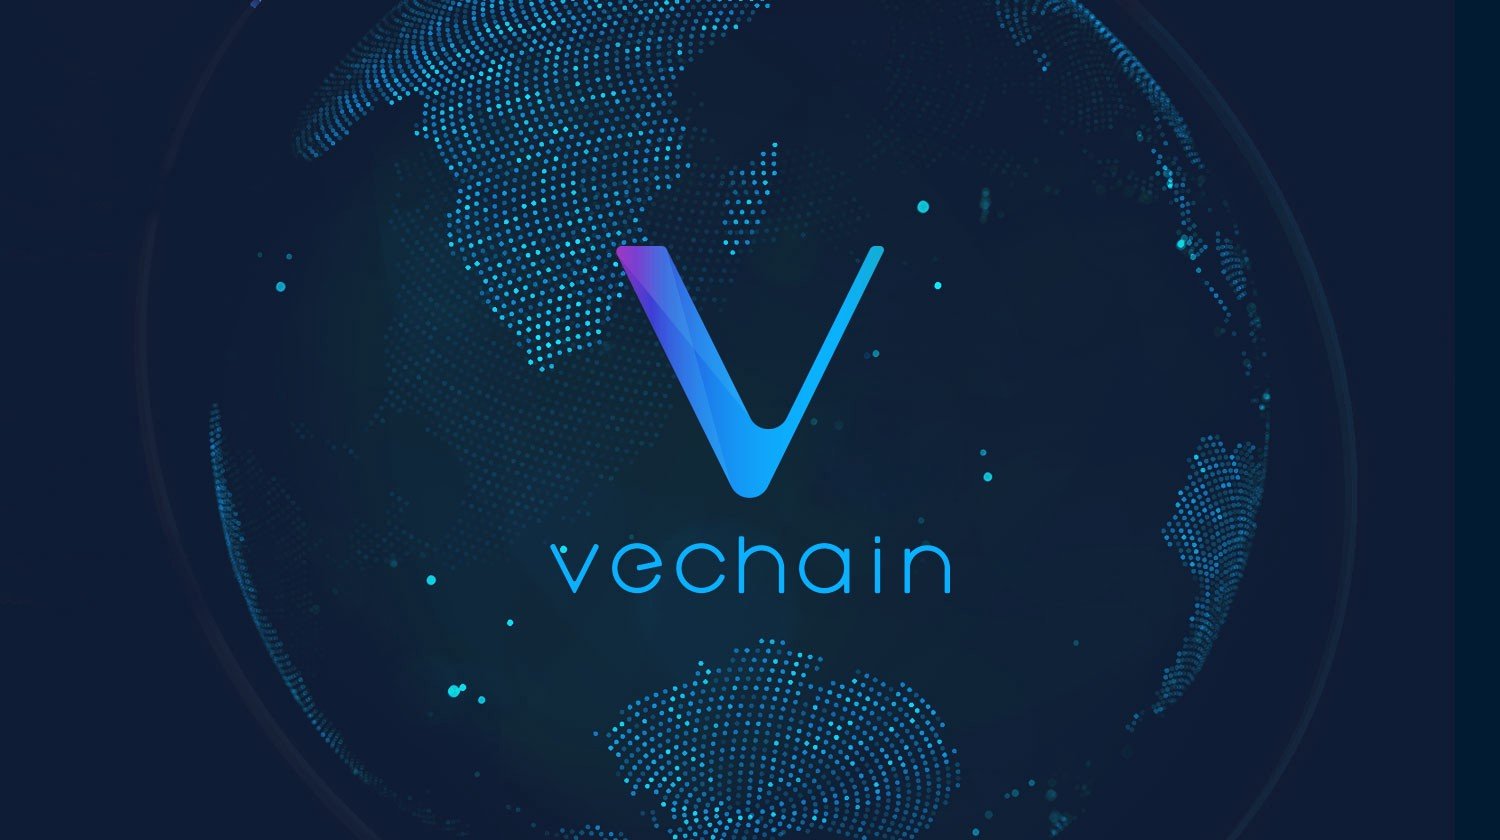 VeChain (VEN) Token Swap on Mobile Wallet Ongoing and a Betting DApp Chooses The Platform